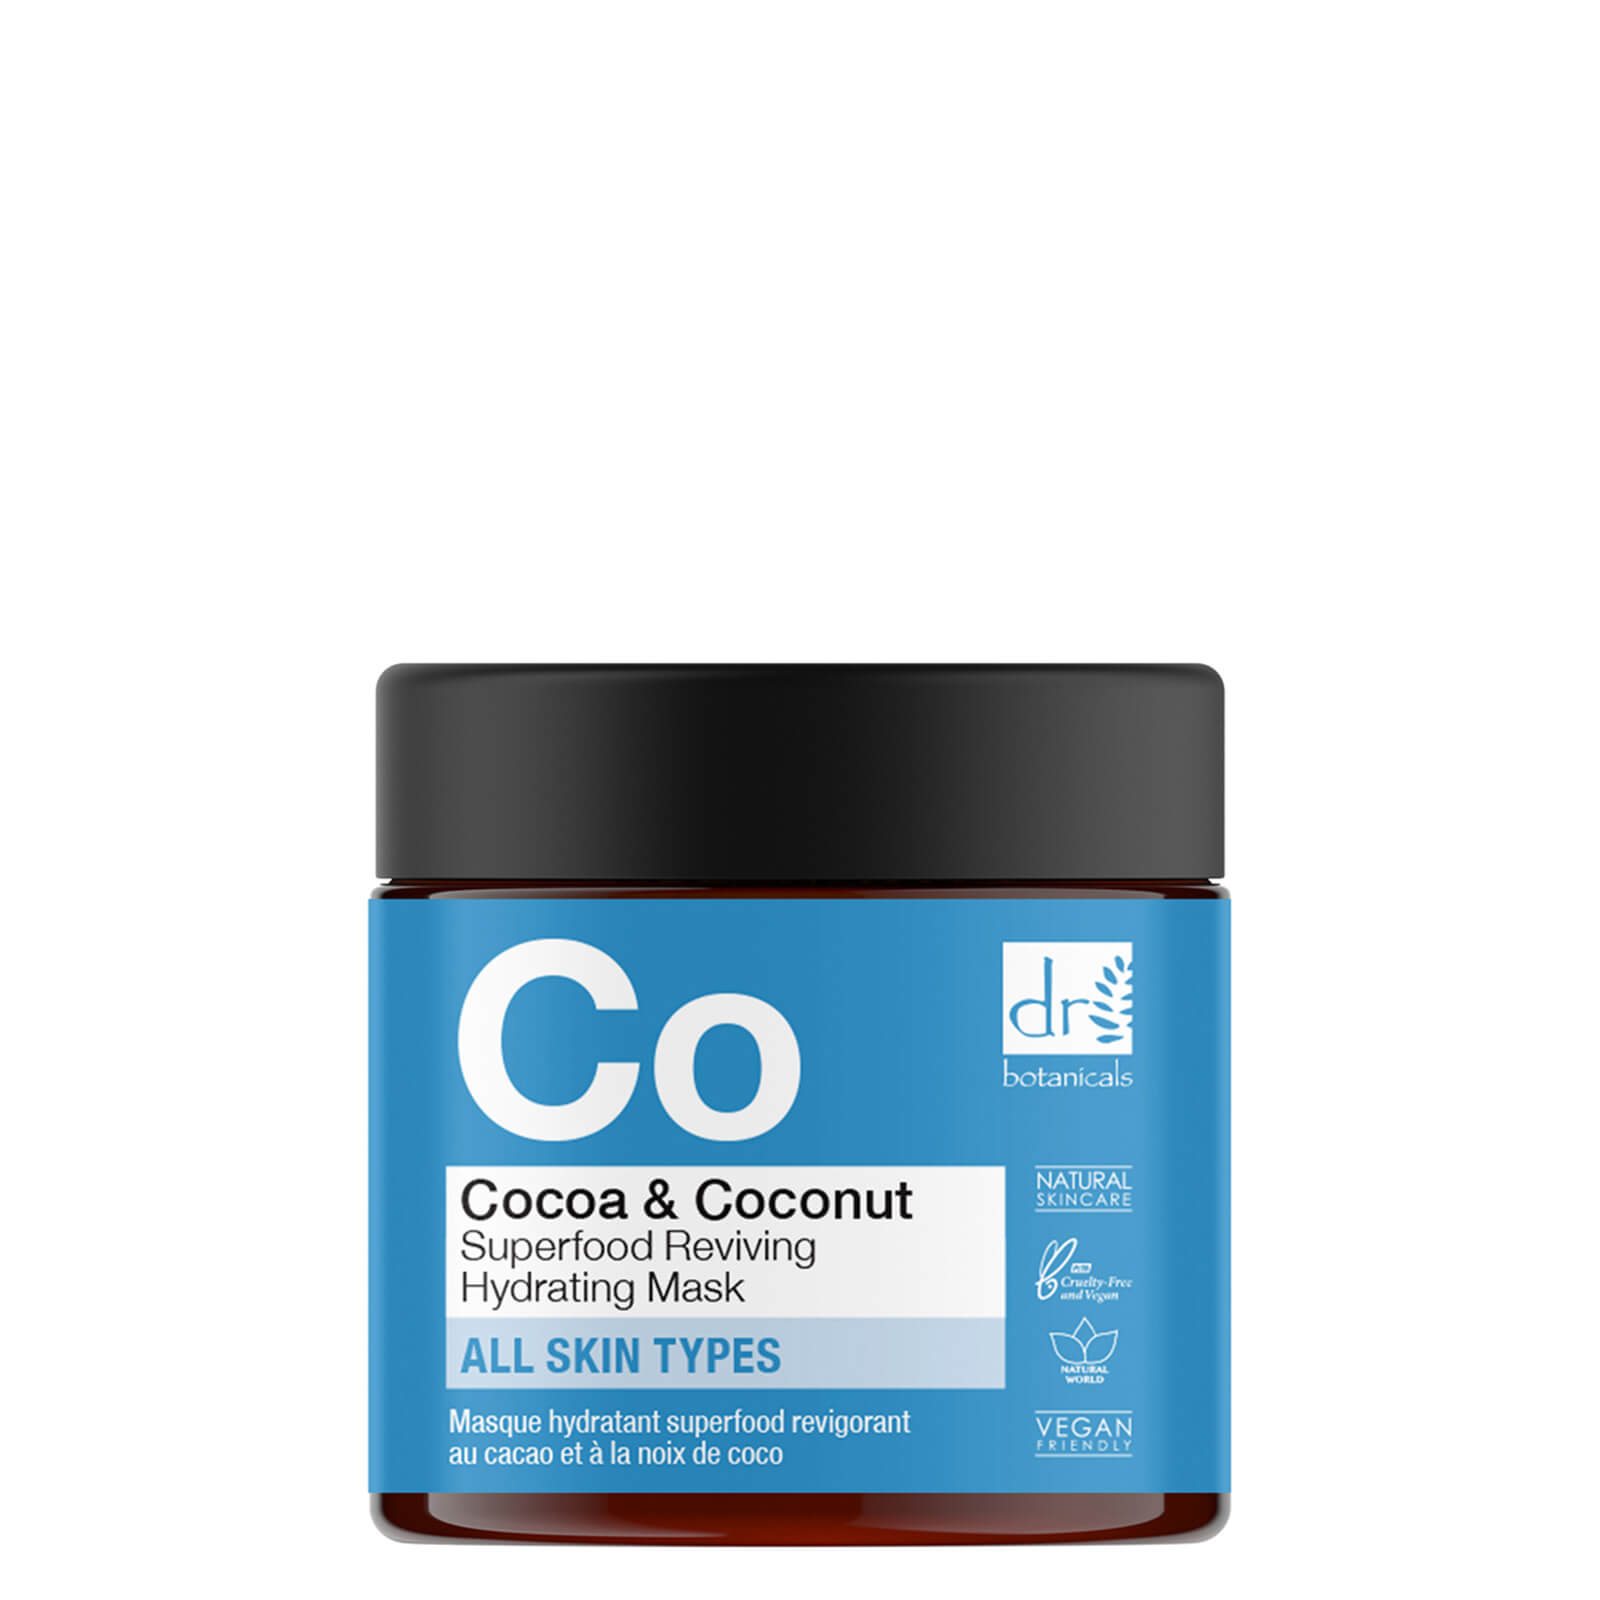 Dr. Botanicals Cocoa And Coconut Superfood Reviving Hydrating Mask 60ml